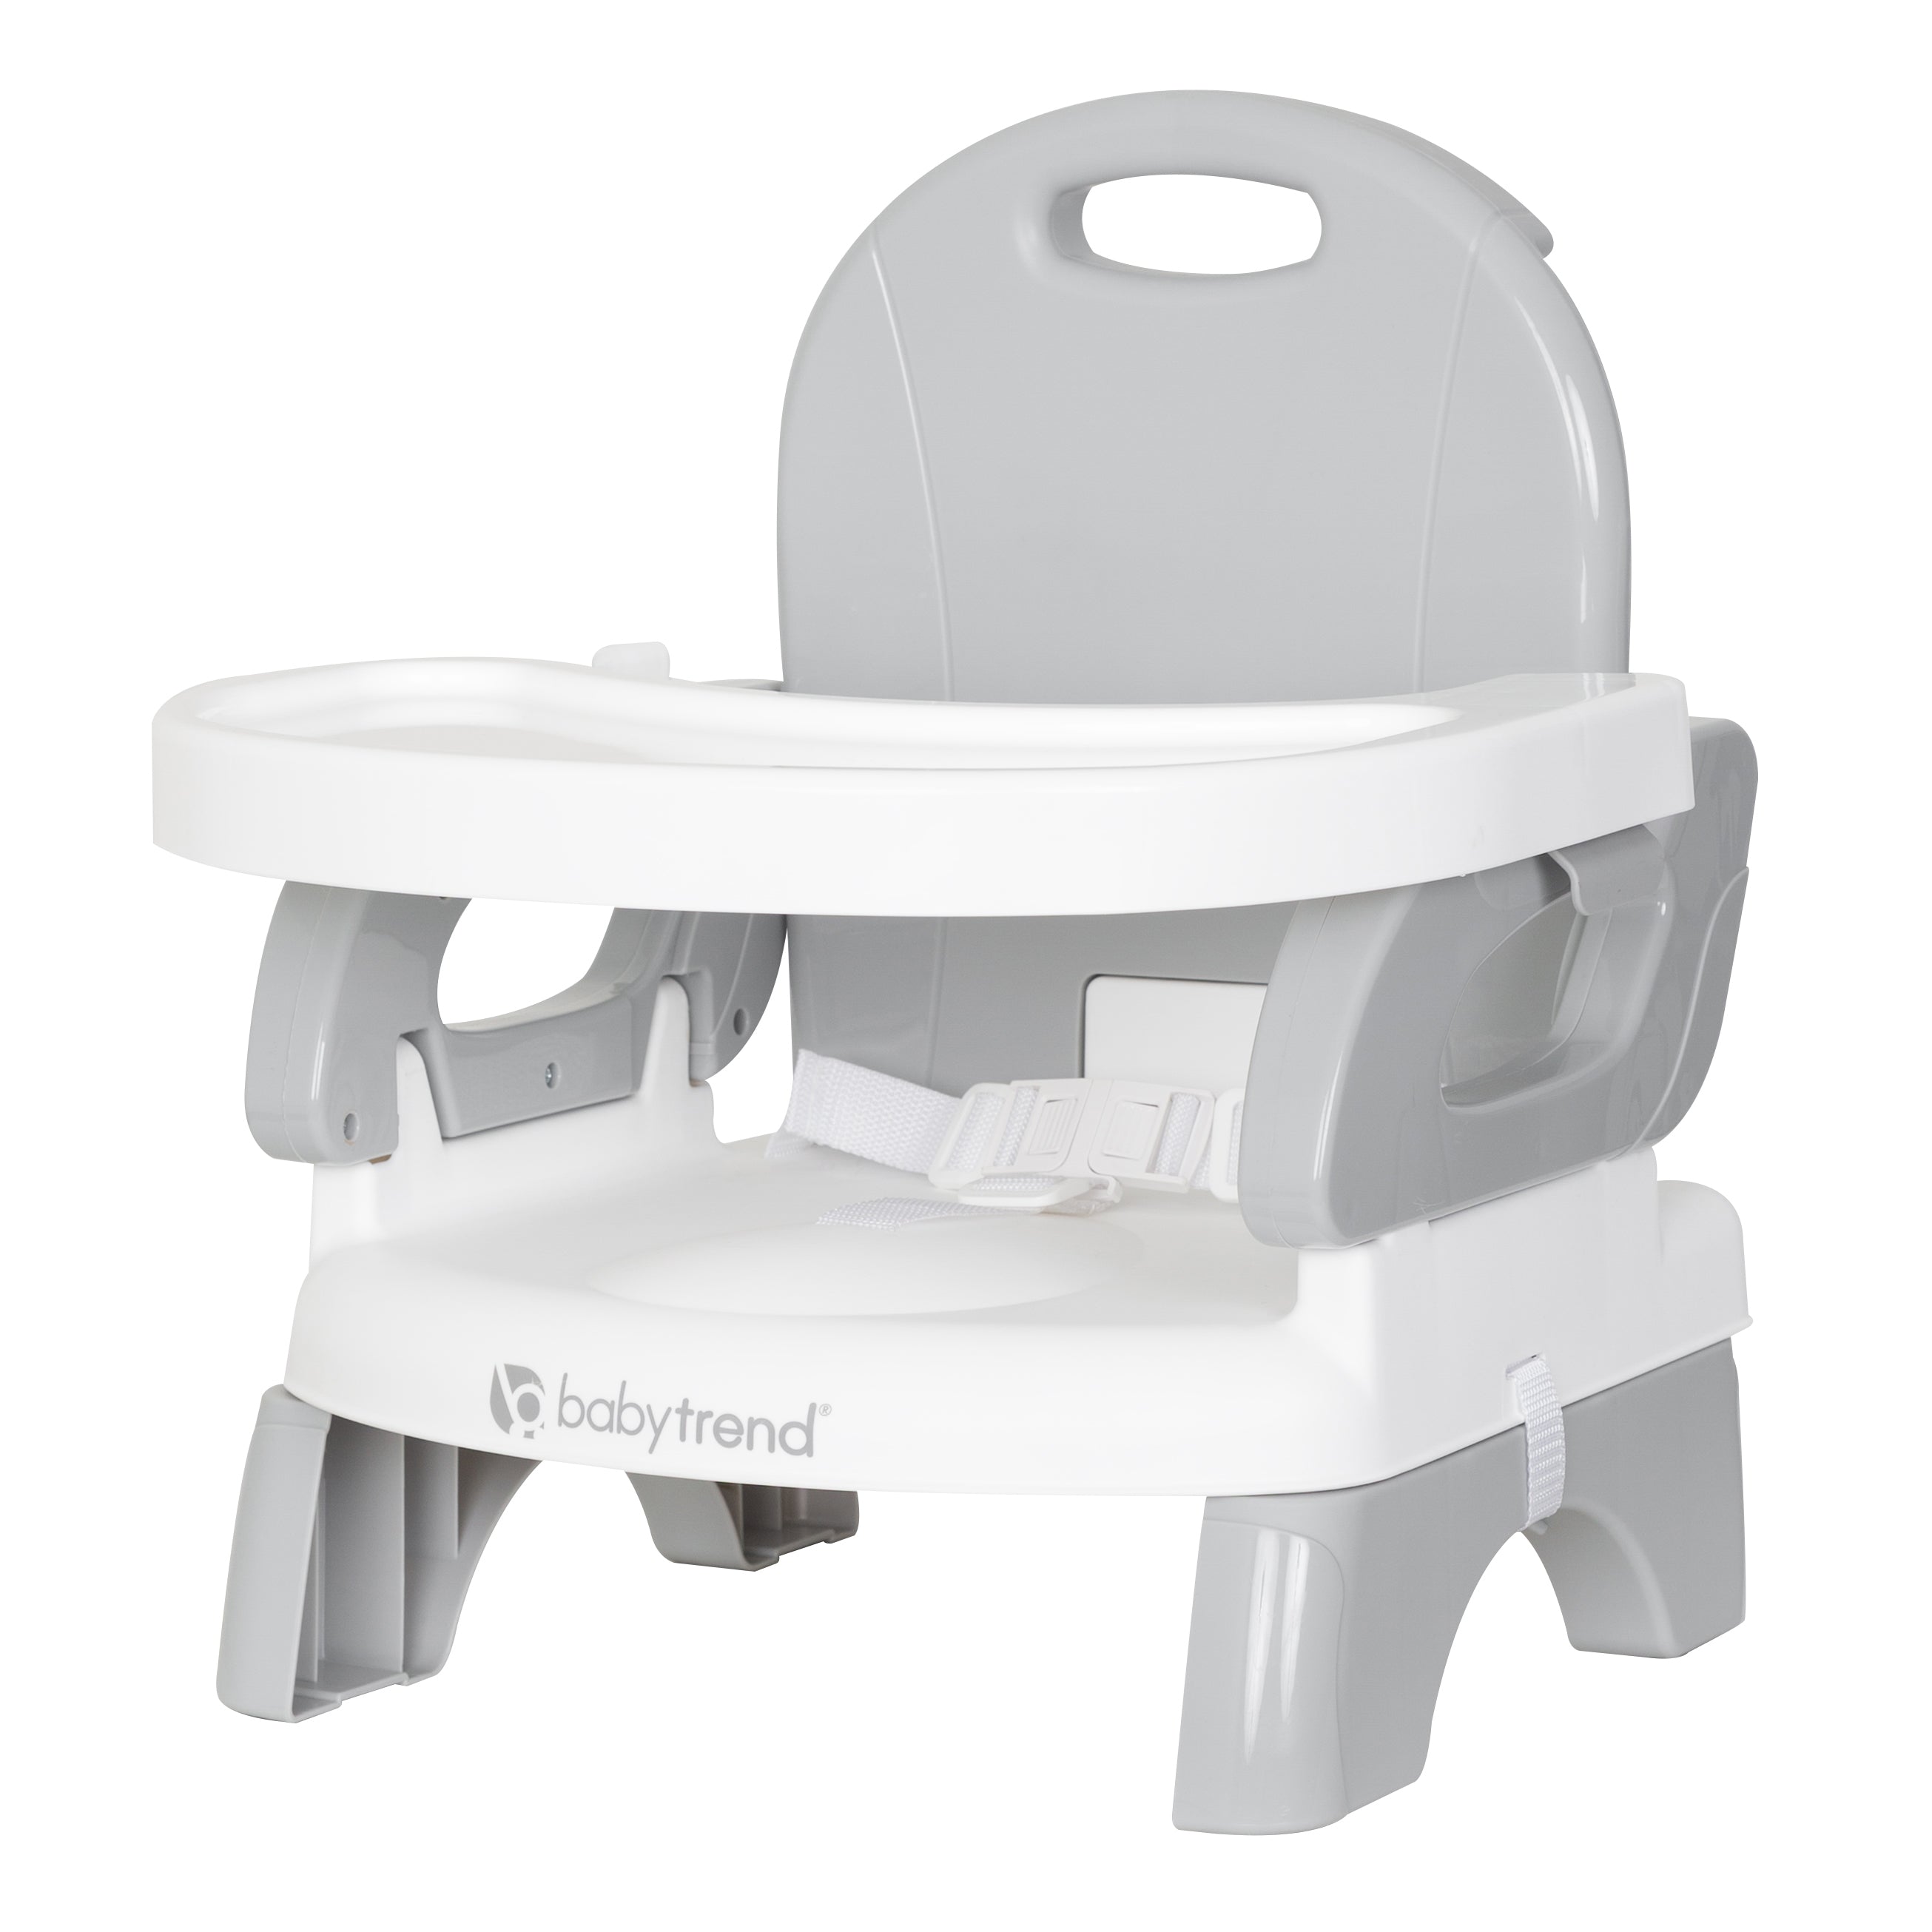 Gymax Baby High Chair Folding Baby Dining Chair w/ Adjustable Height & - Grey